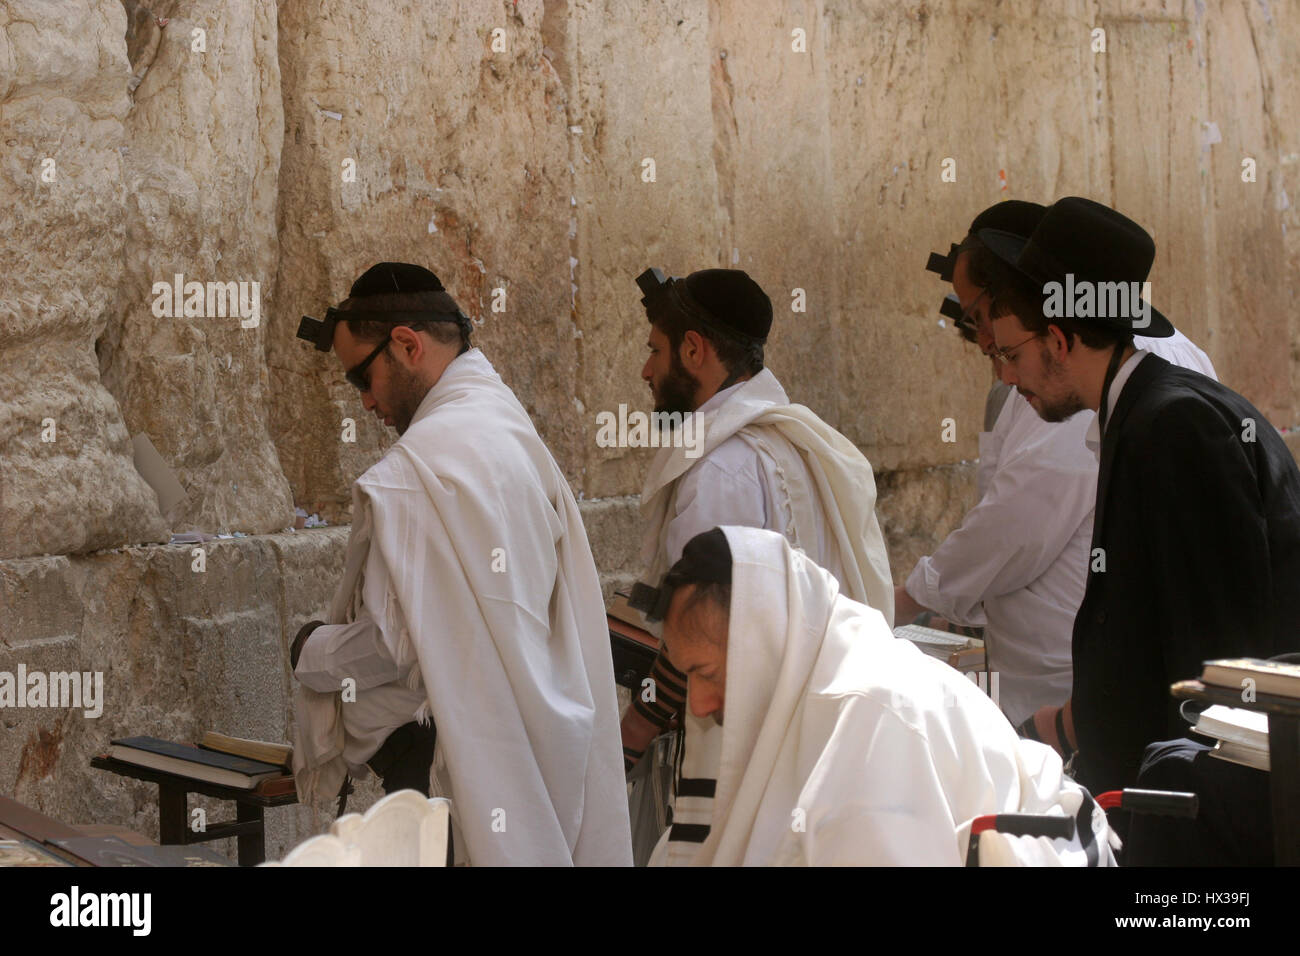 Jewish men pray at the western wall in Jerusalem, IL. The wall is one of the holiest sites in Judaism attracting thousands of worshipers daily Stock Photo